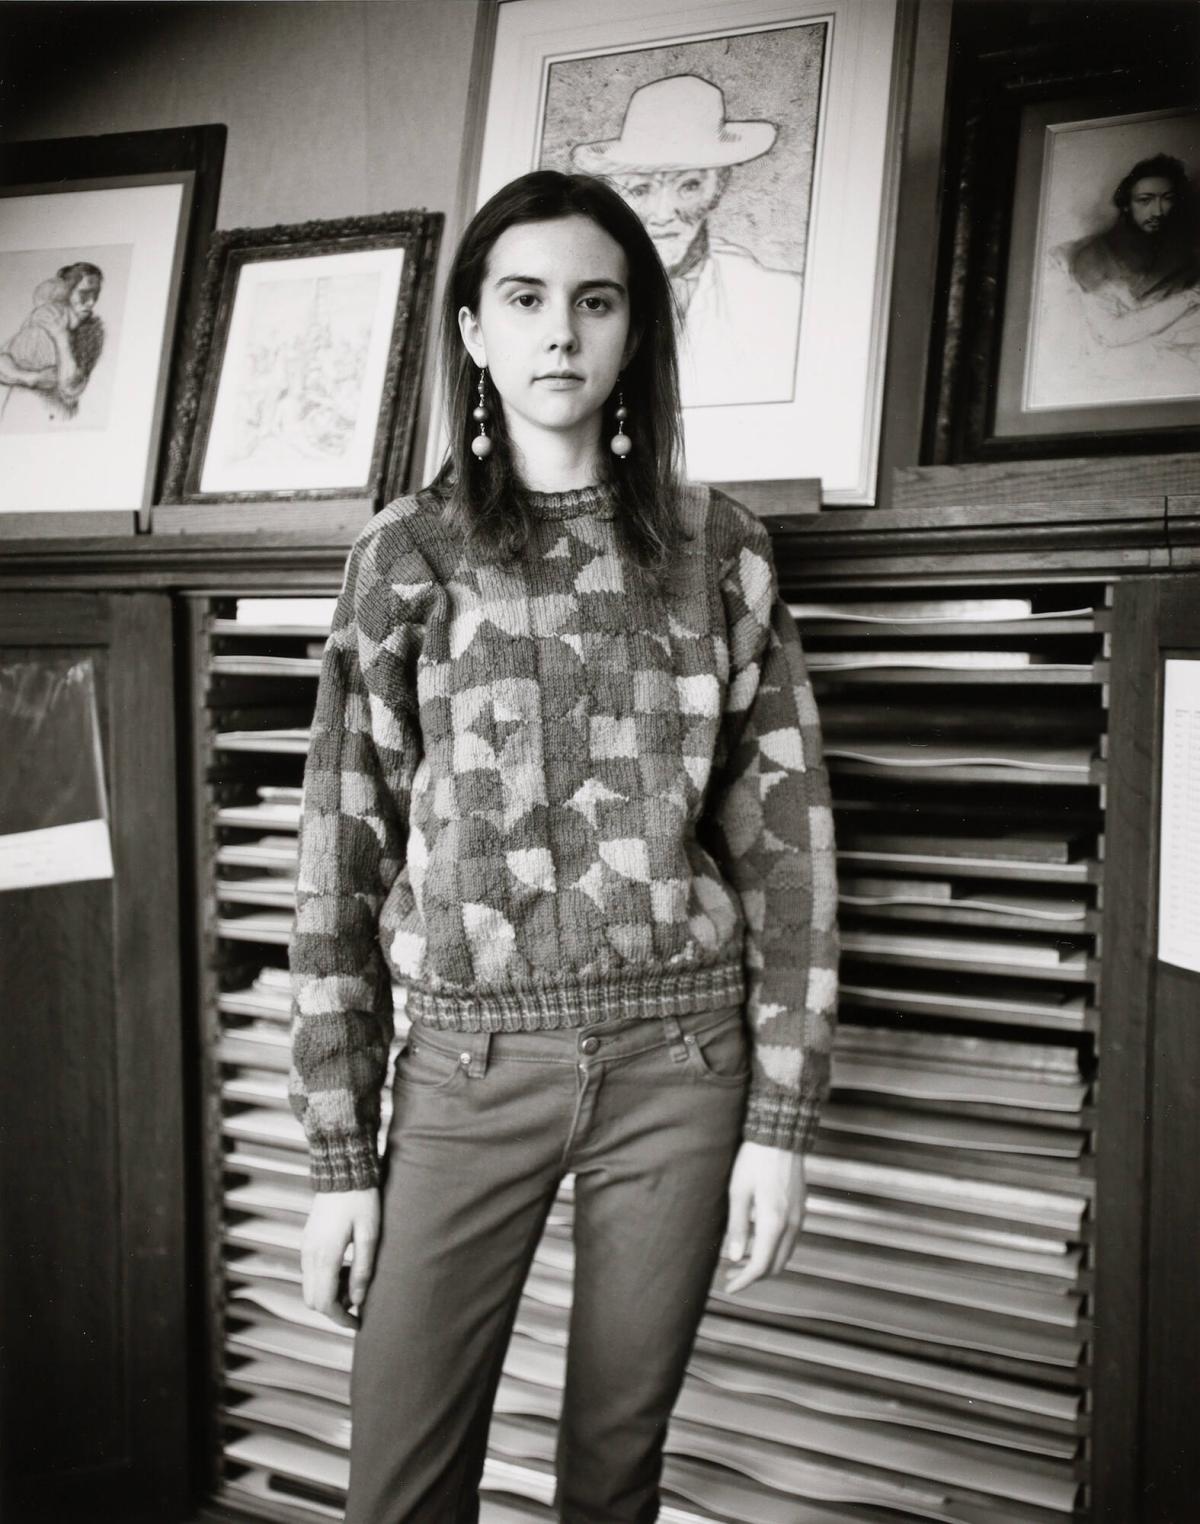 Pippa Eccles, Study Room Assistant, Agnes Mongan Center, from the series A Moment Collected: Photographs at the Harvard Art Museum, 2006–2008